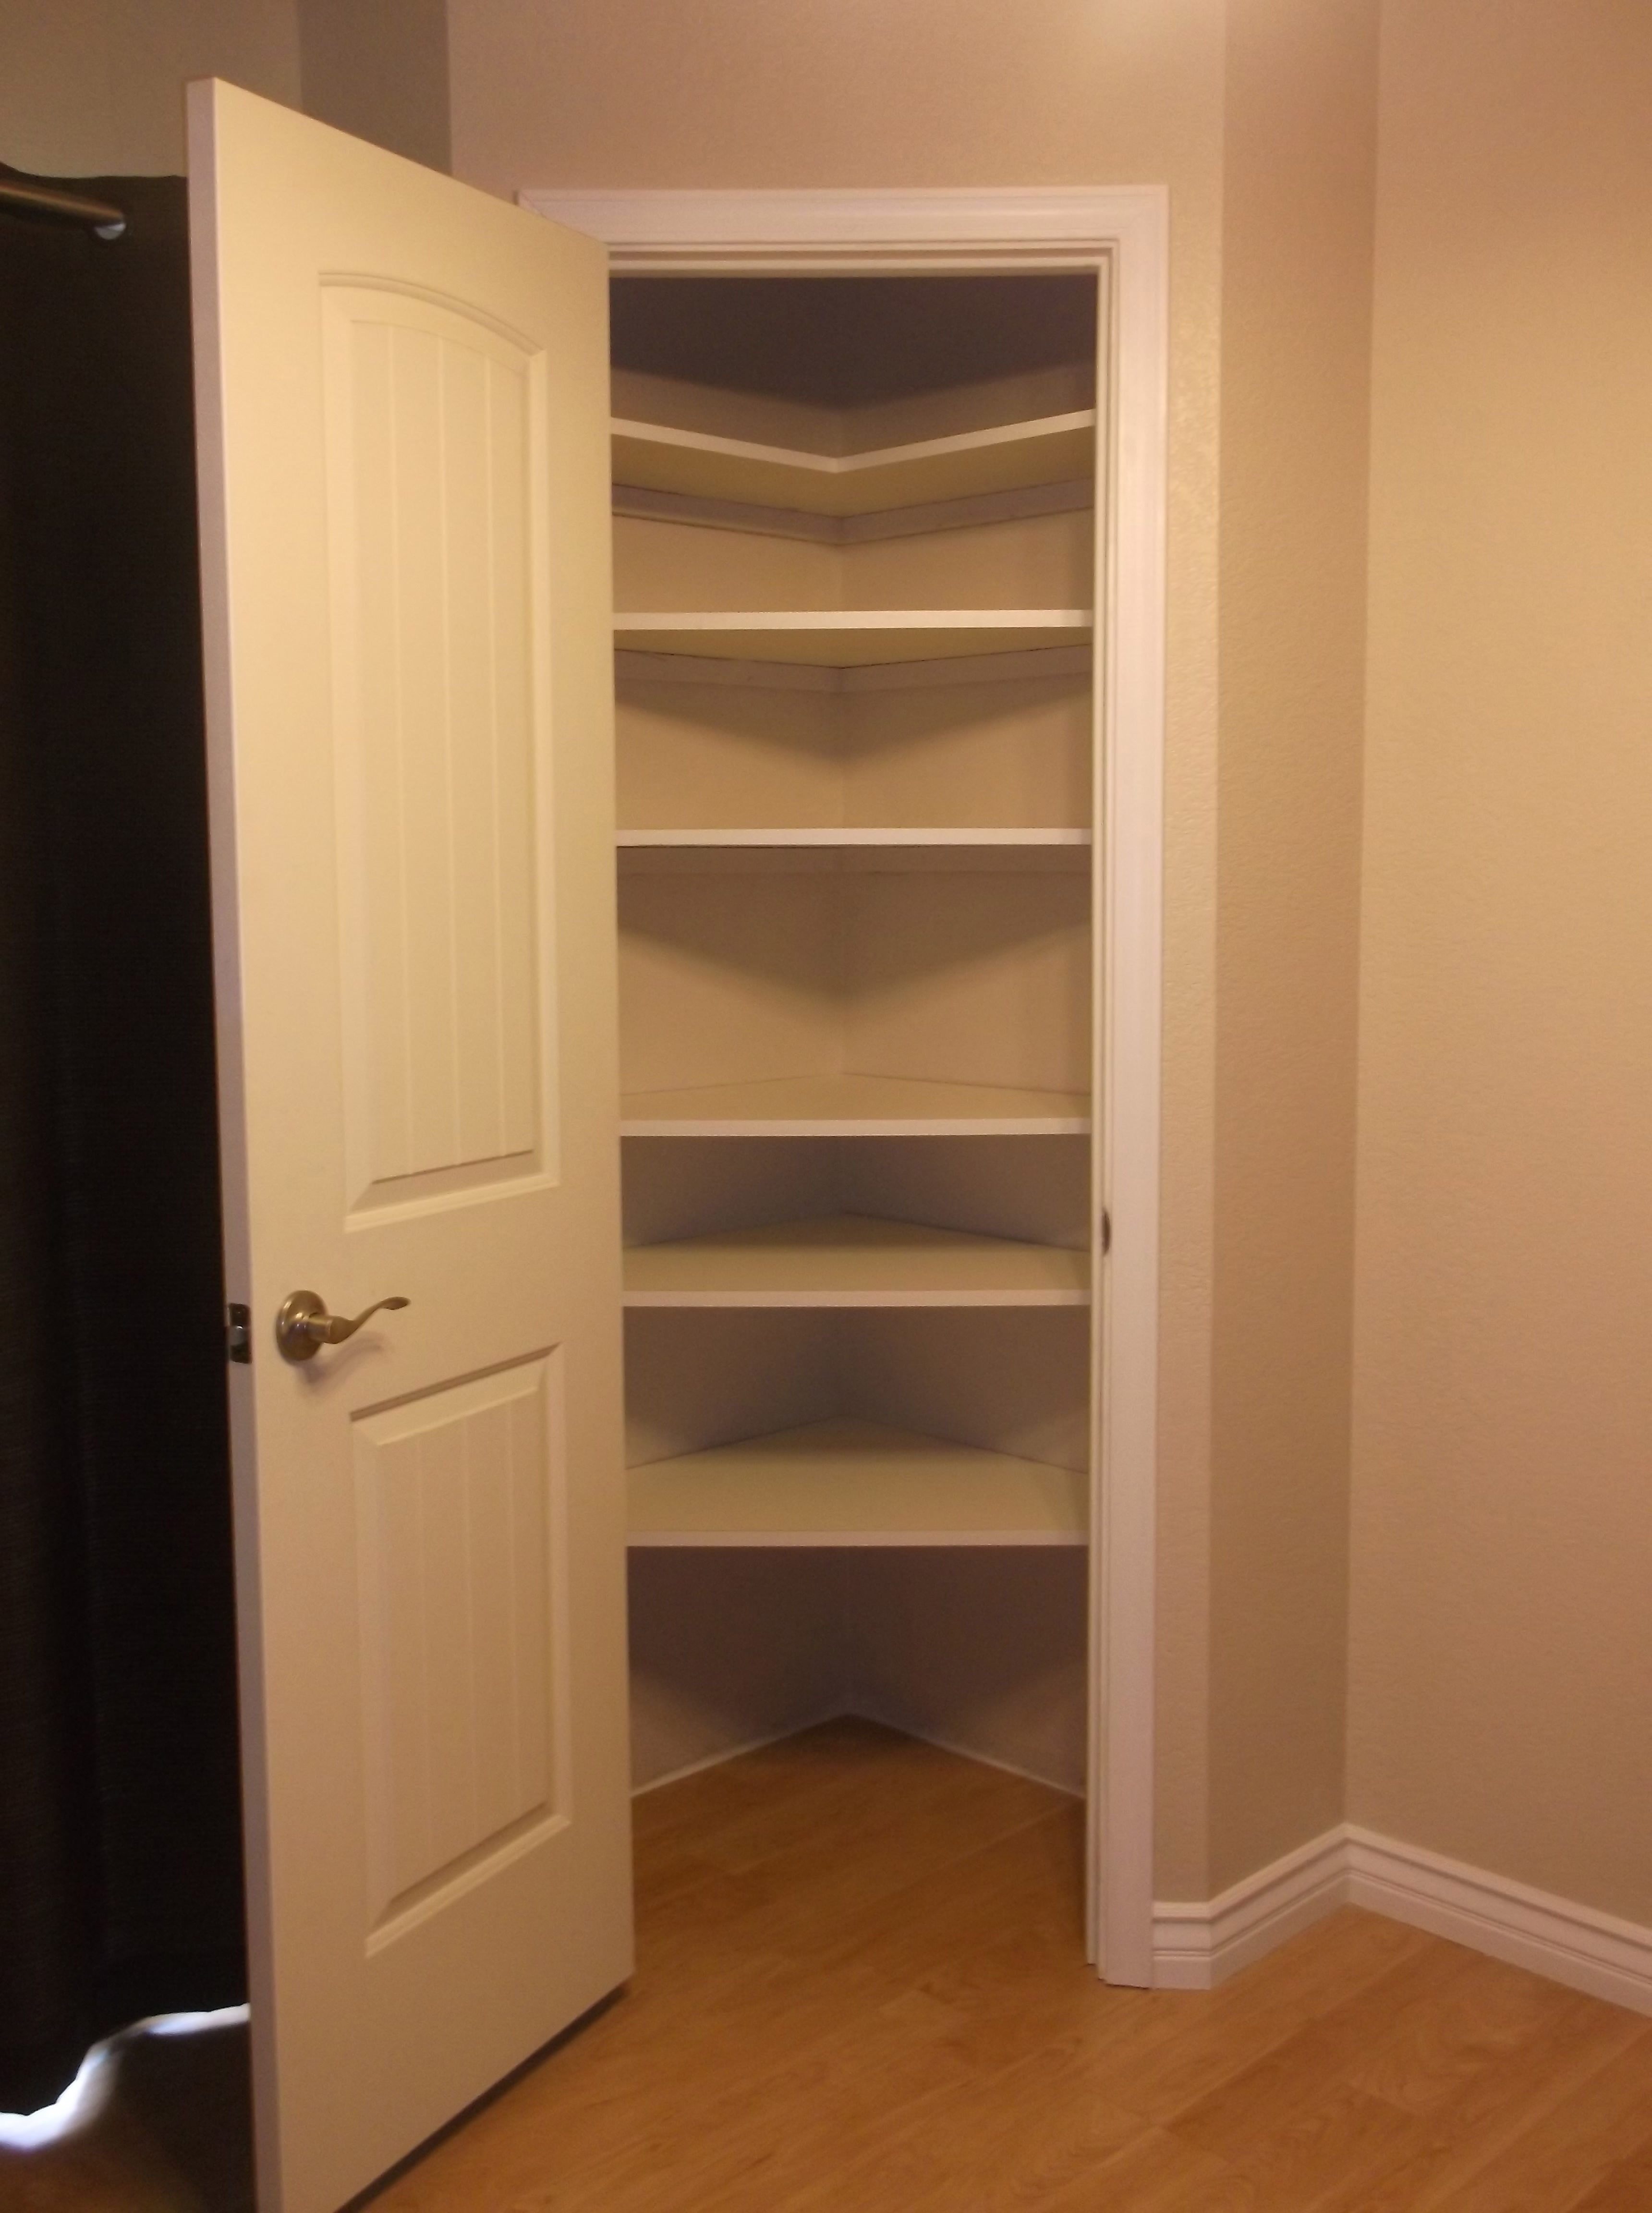 Finished Pantry Interior